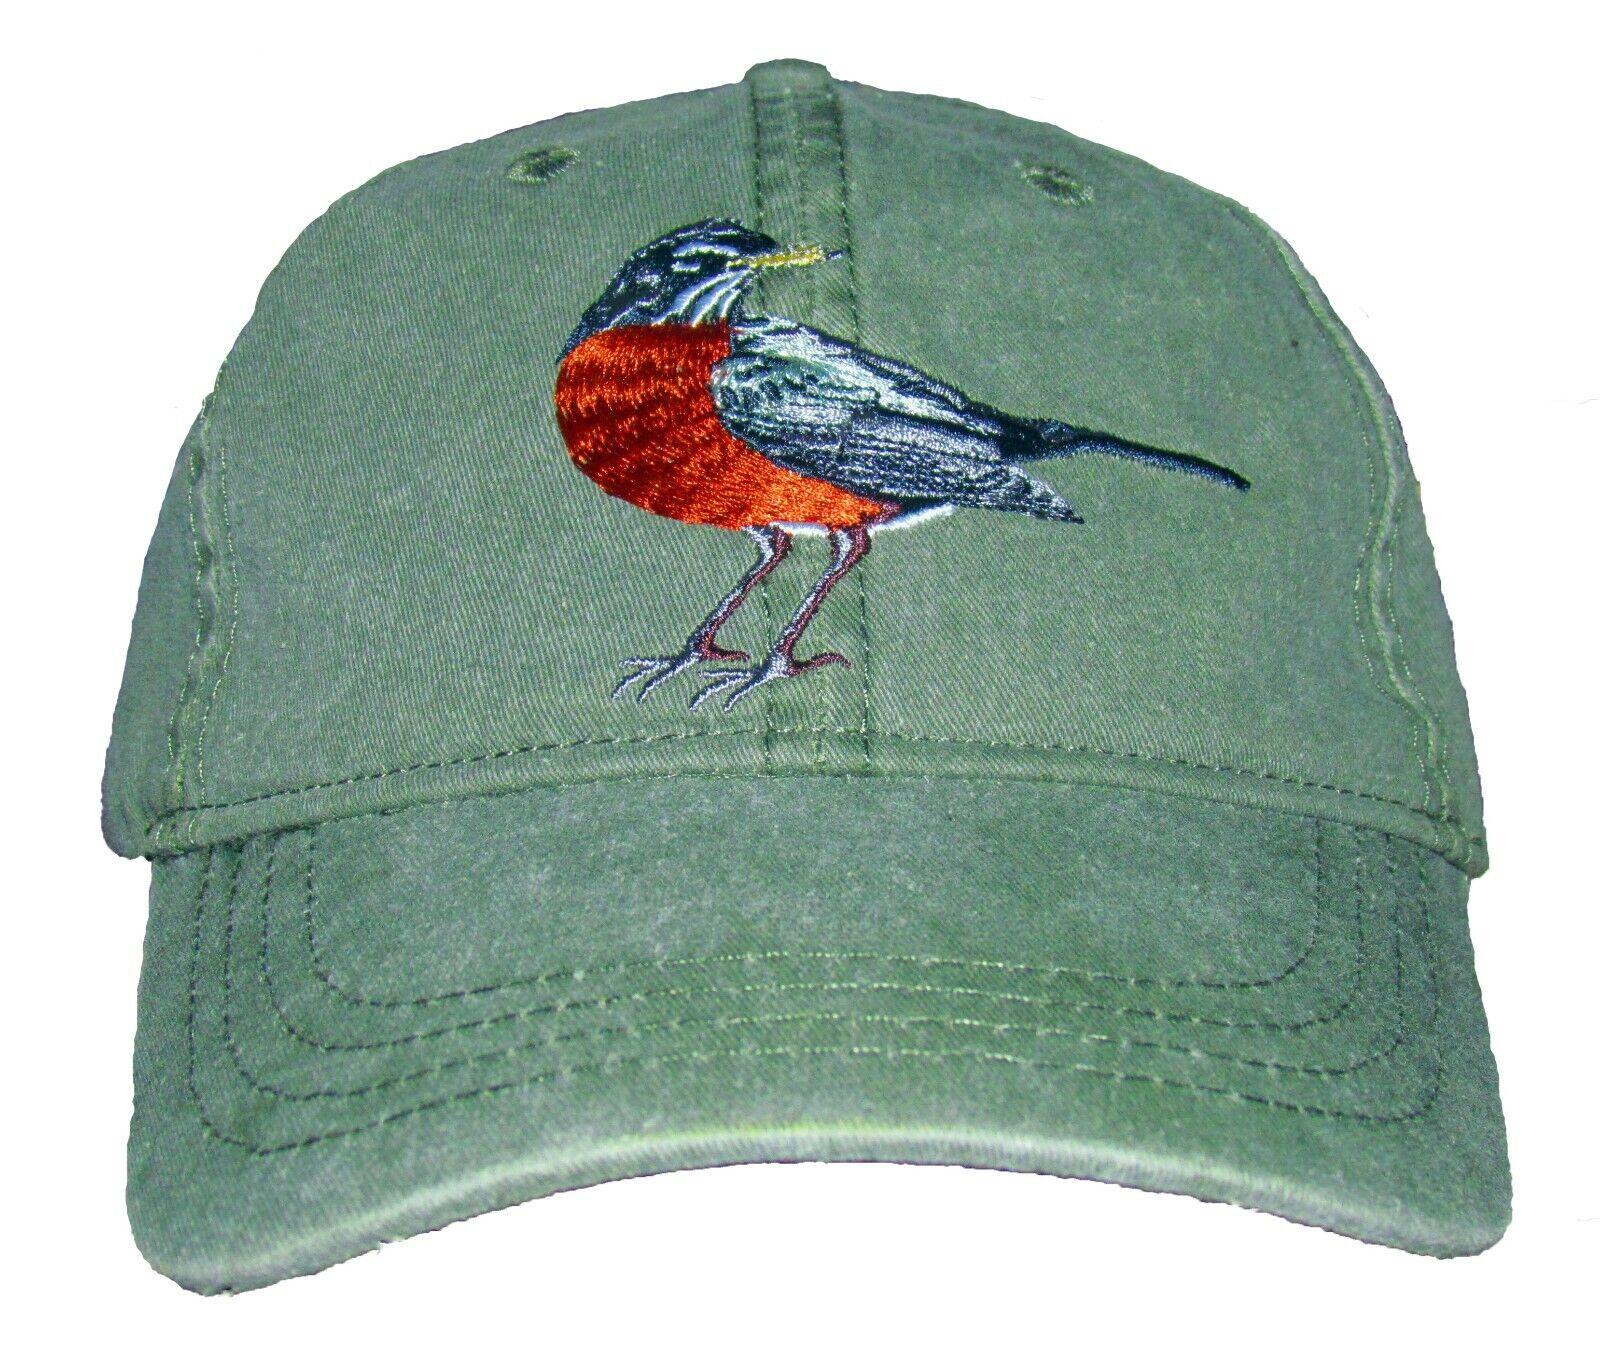 American Robin Embroidered Cotton Cap NEW Hat Bird 